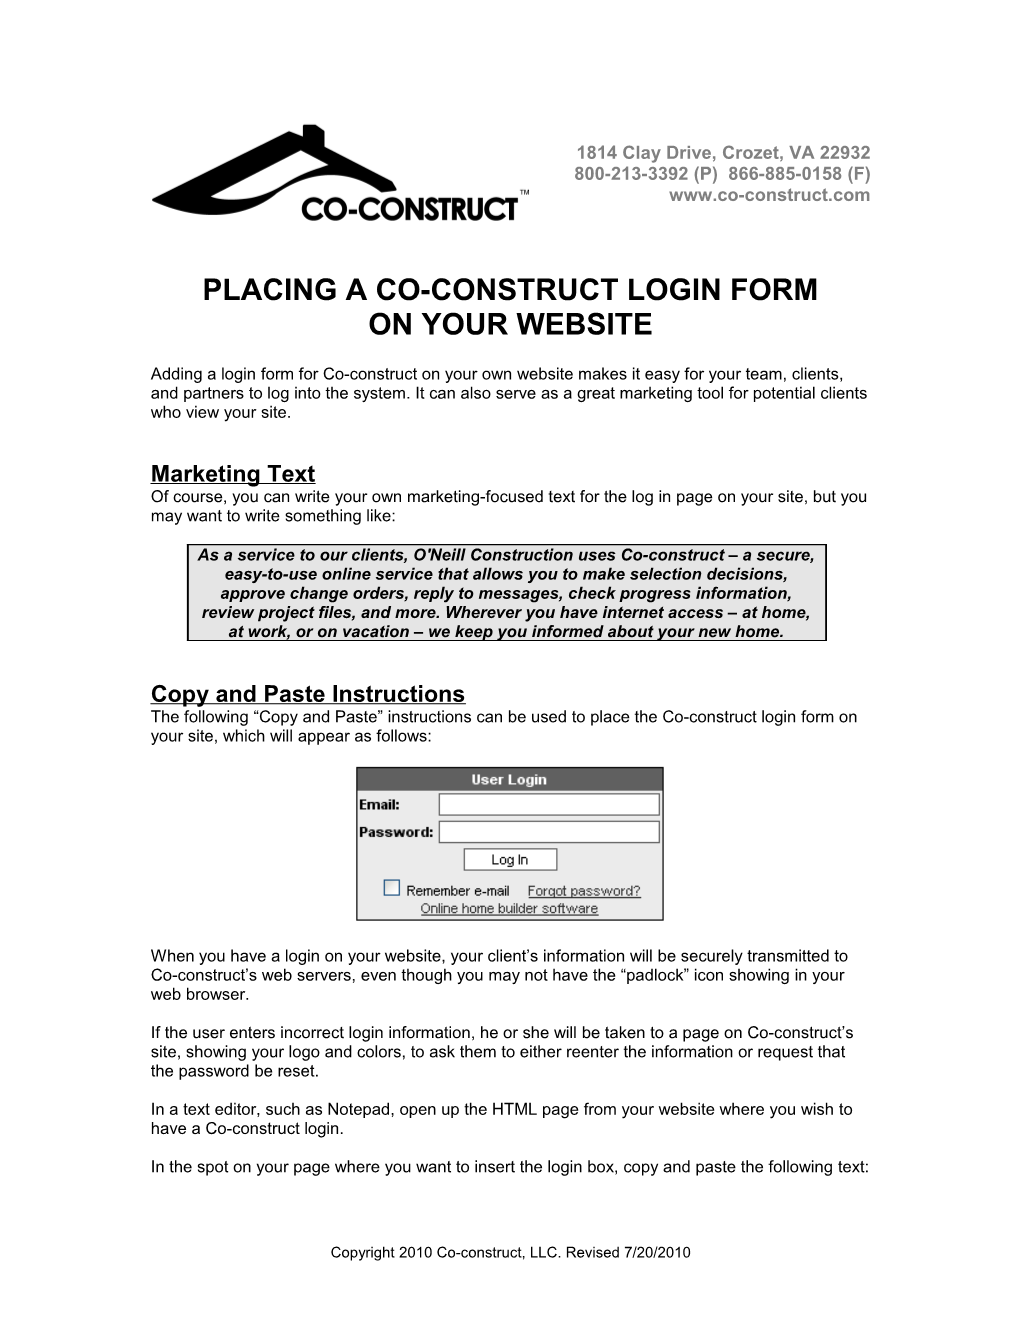 Placing a Co-Construct Login FORM